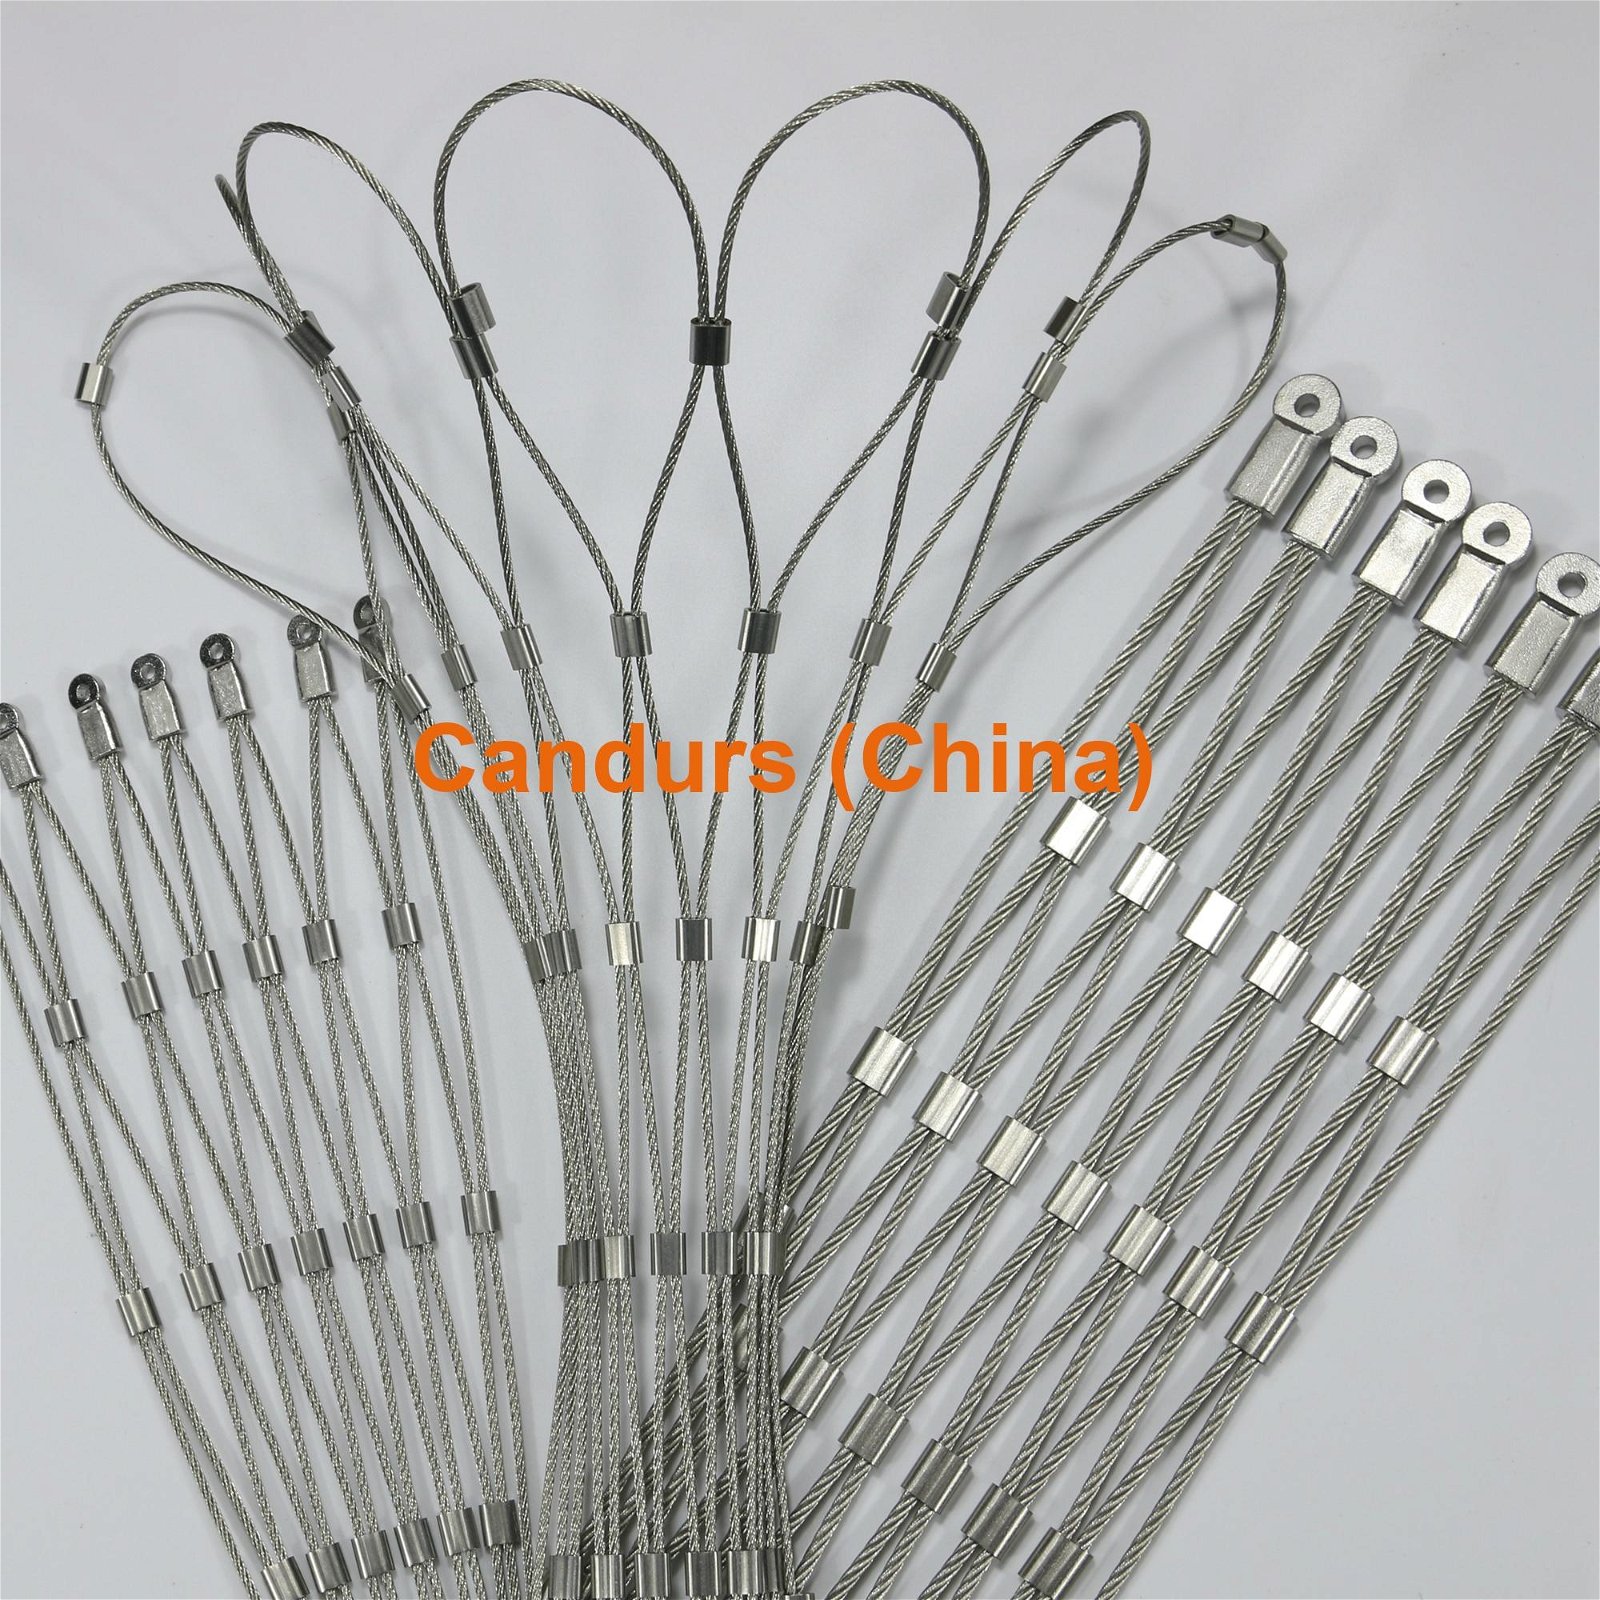 Stainless Steel Flexible Netting Tennis Court Fence 5